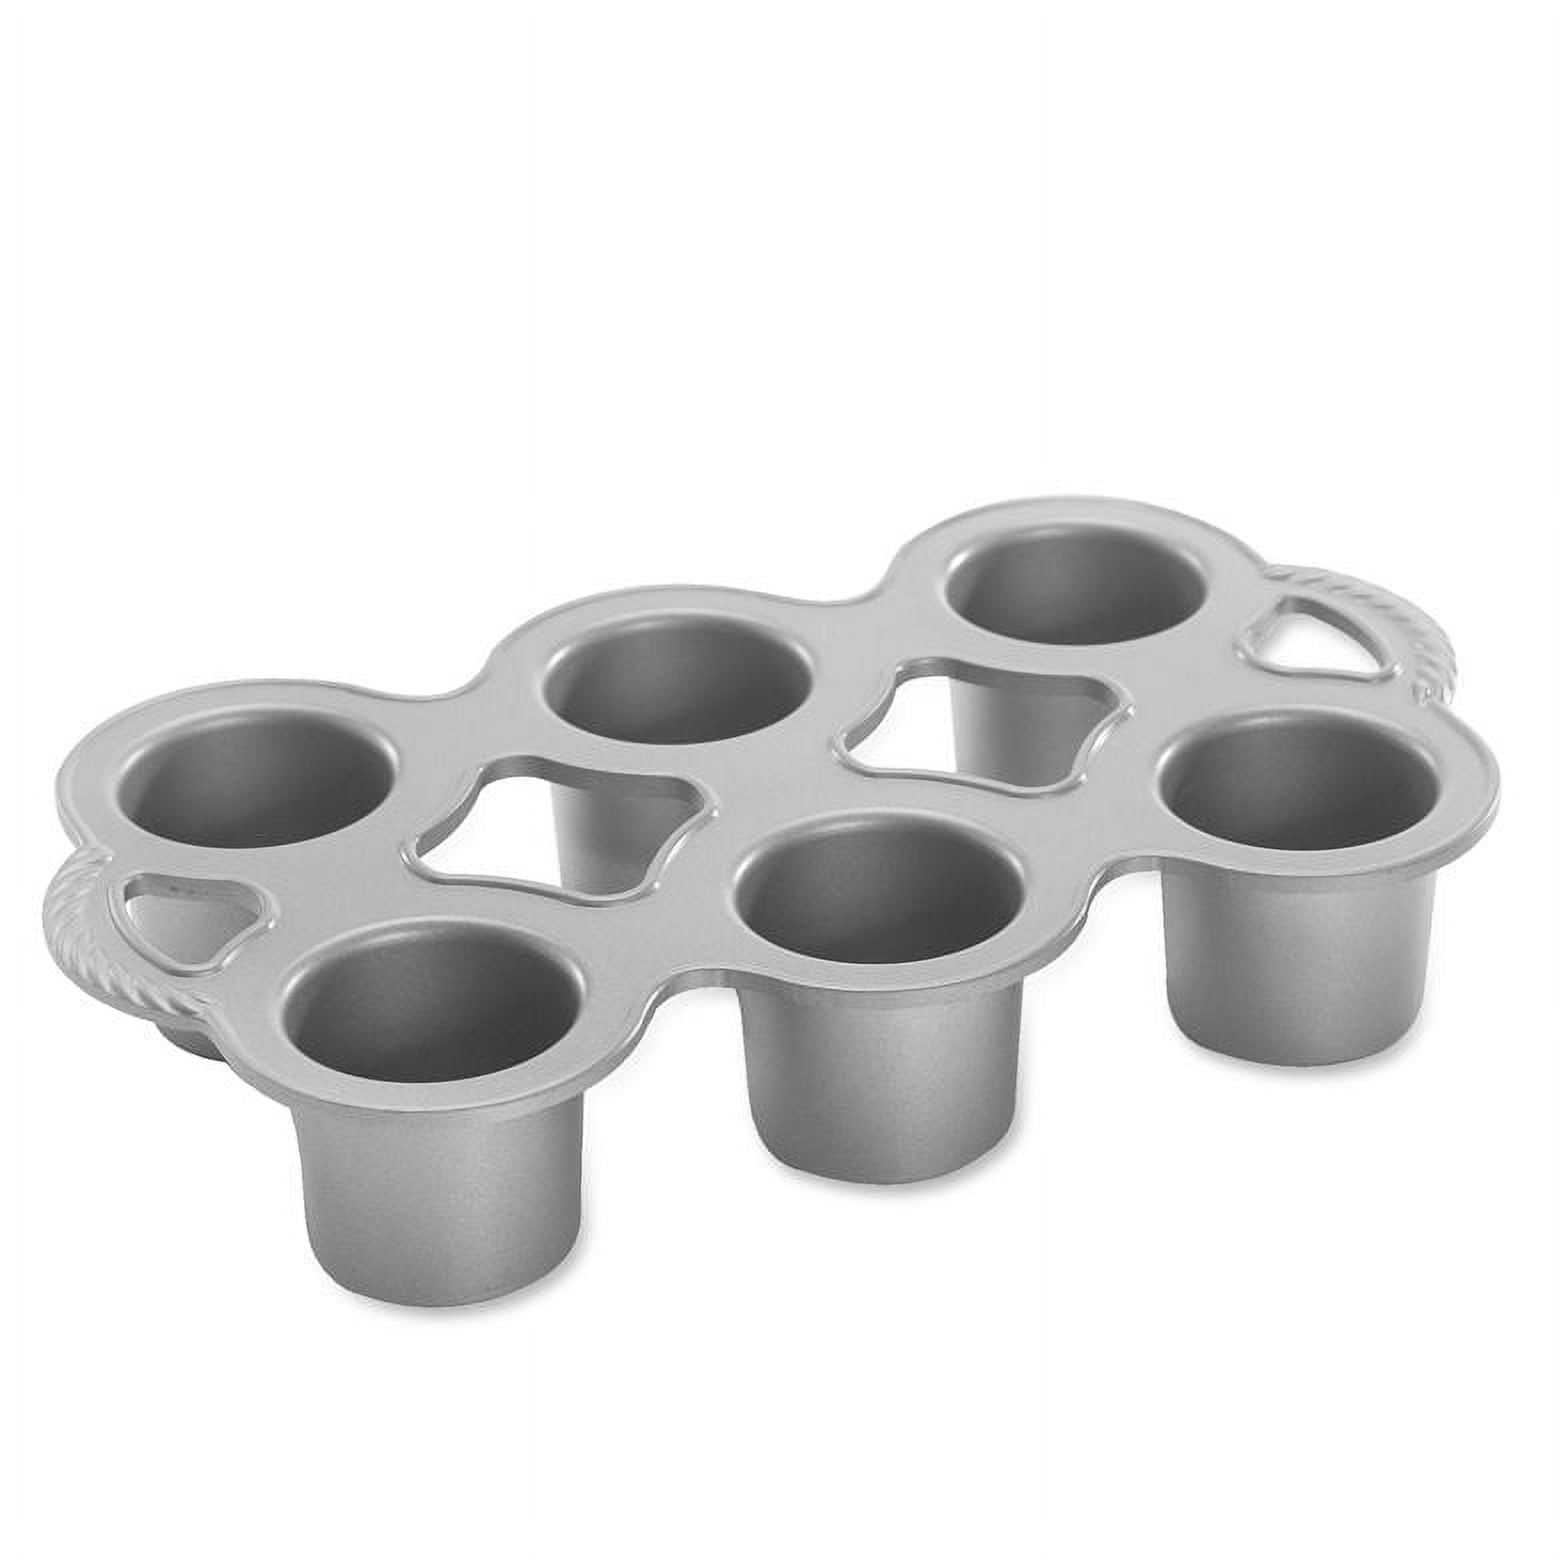  Nordic Ware Cast Aluminum Petite Popover Pan 1/4 Cup Each, 12  Cavity, Silver/Gray: Baking Molds: Home & Kitchen